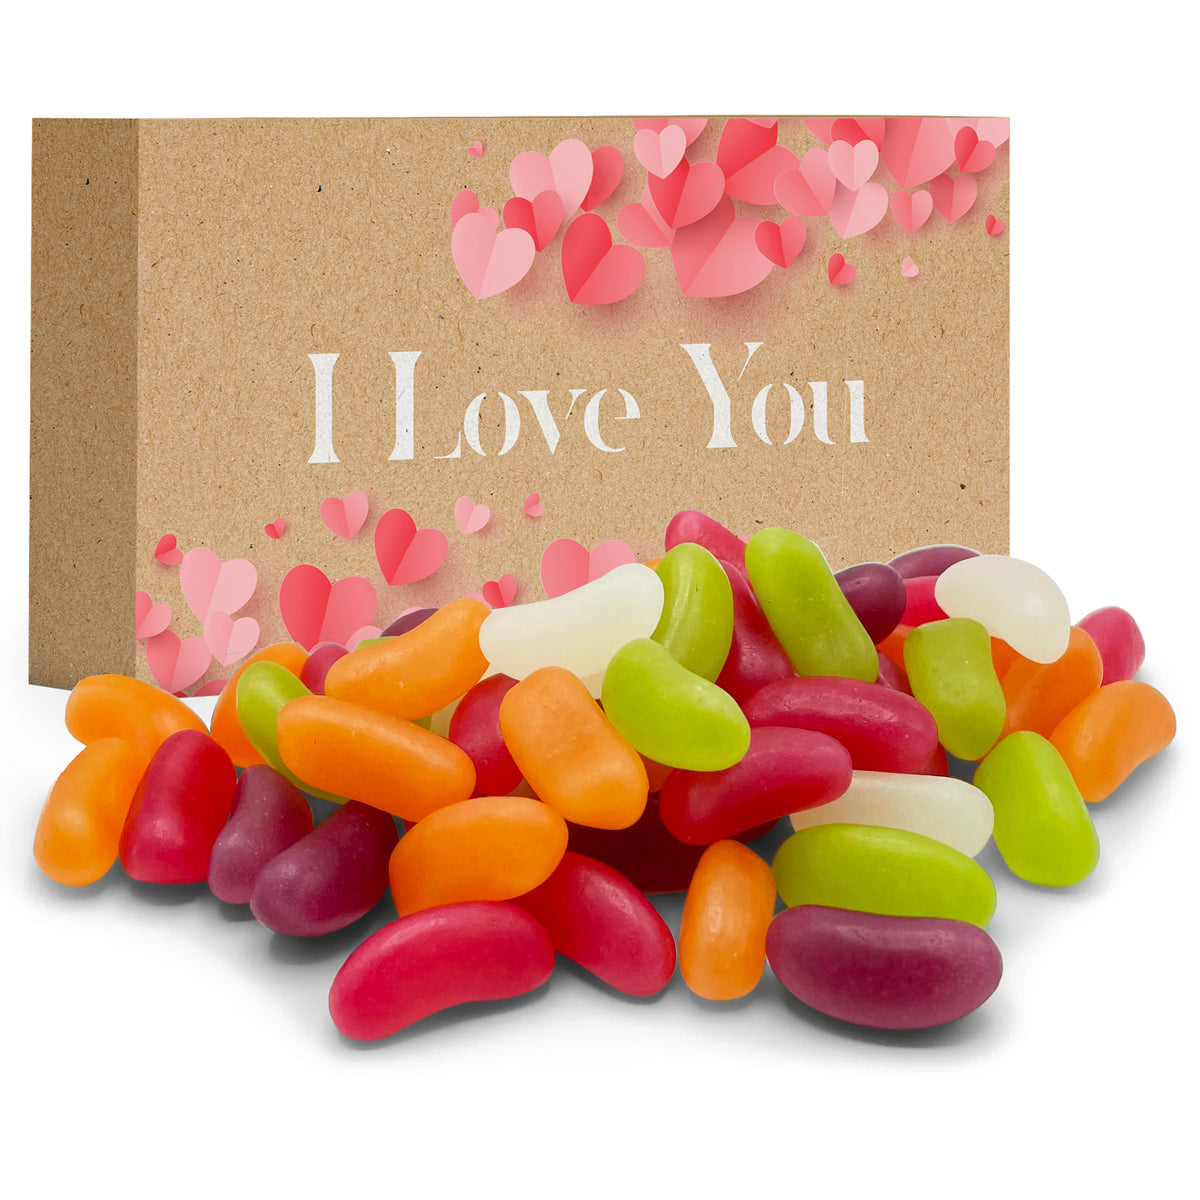 I Love You Kraft Gift Box with Jelly Beans